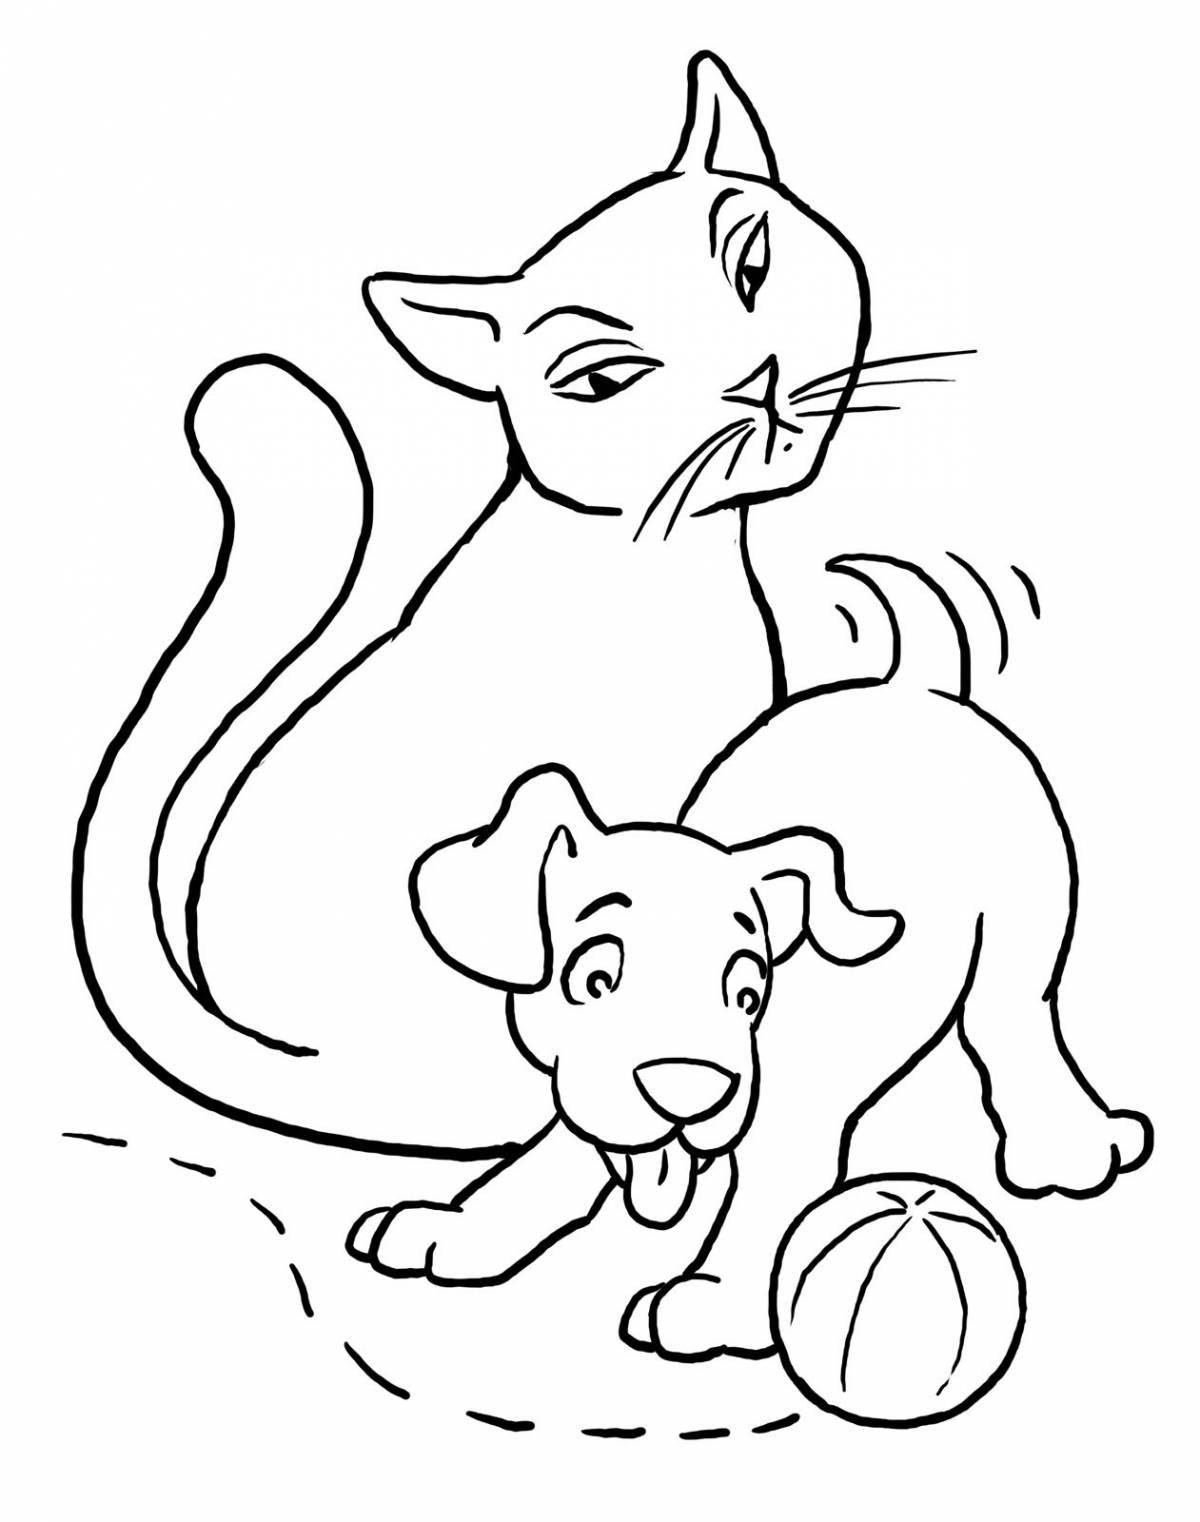 Fun cat and dog coloring book for kids